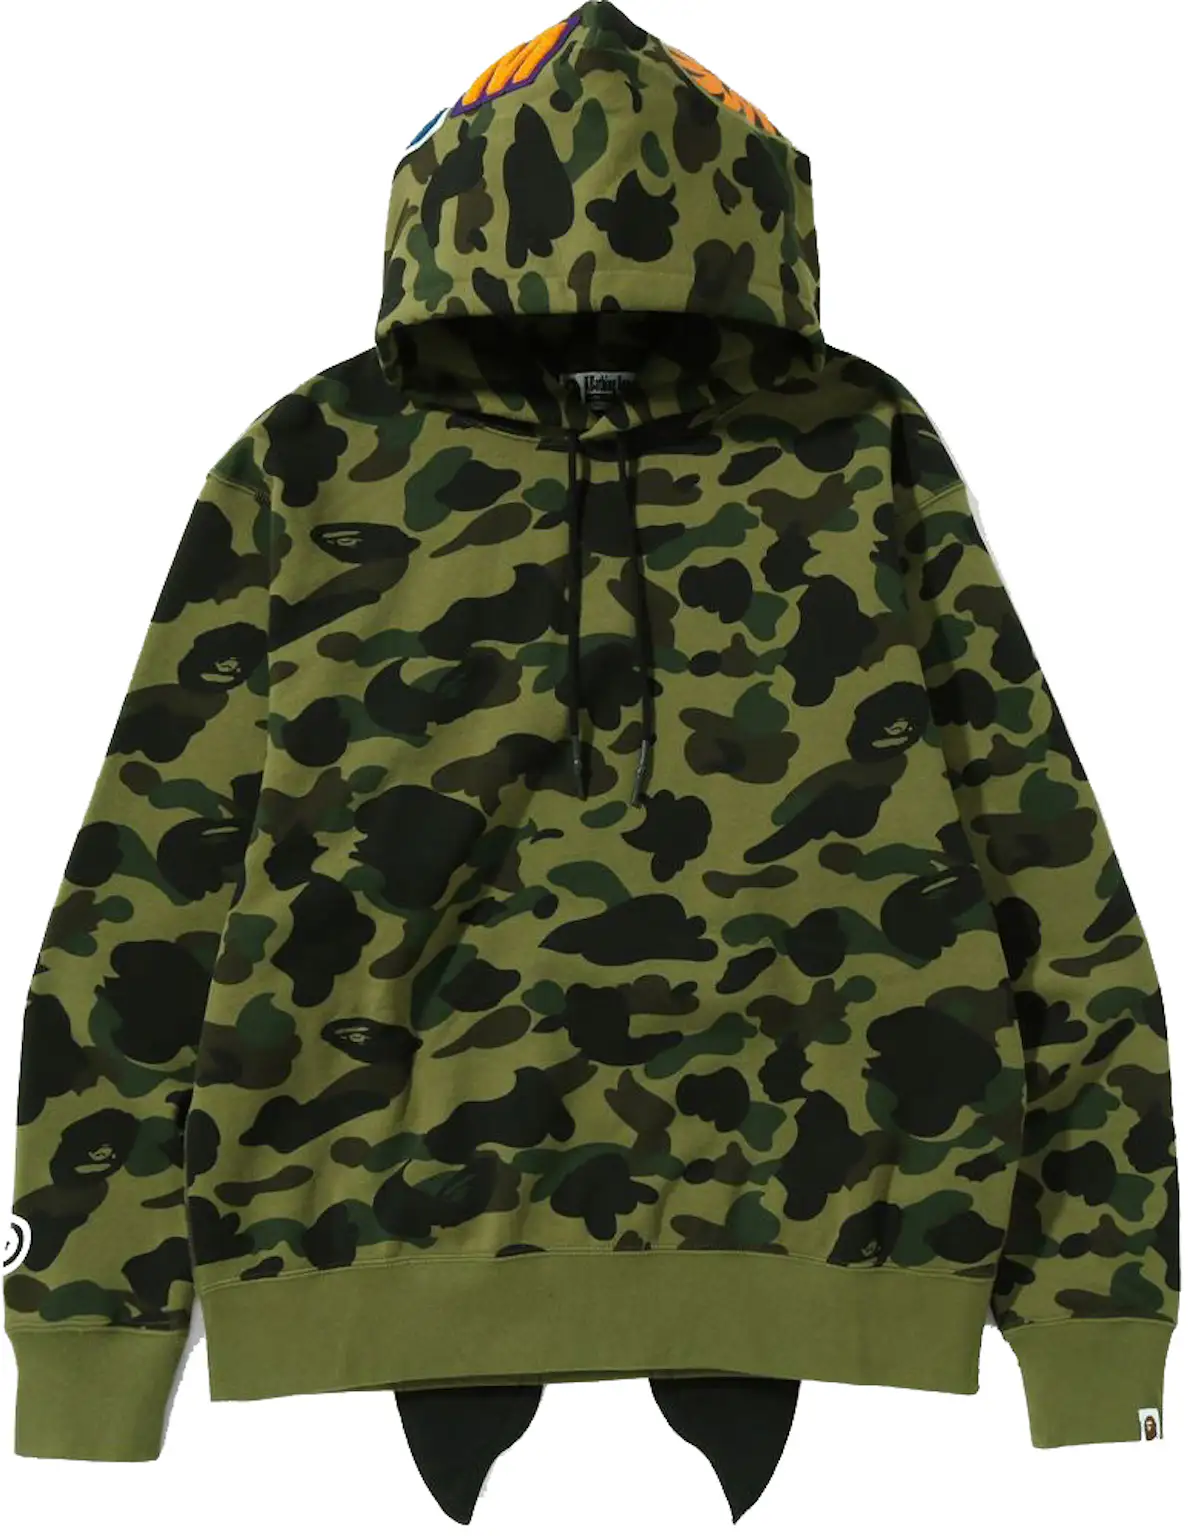 BAPE 1st Camo Shark Relaxed Fit Pullover Hoodie Green - FW21 - FR